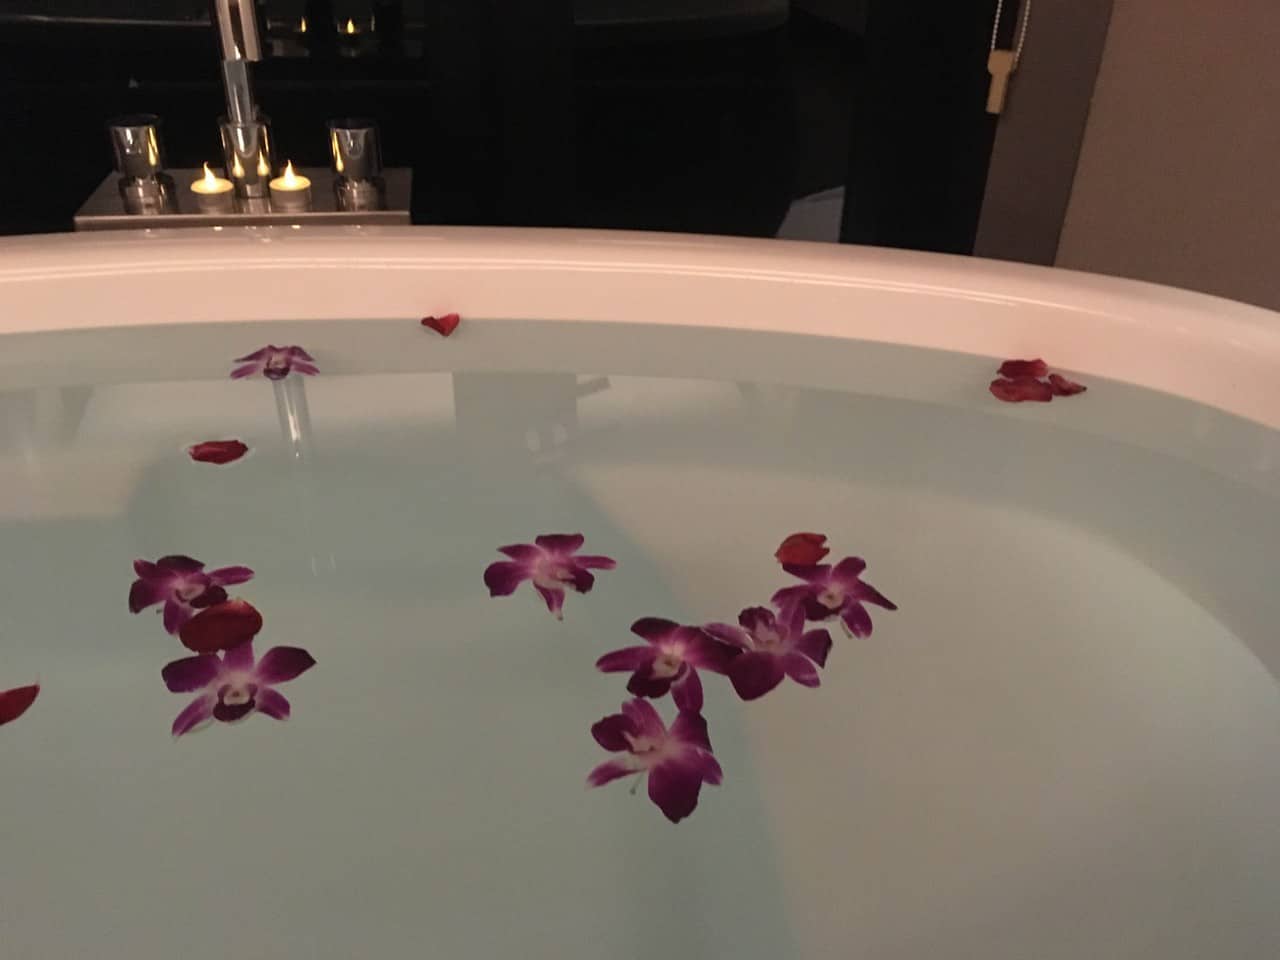 A bath filled with flowers